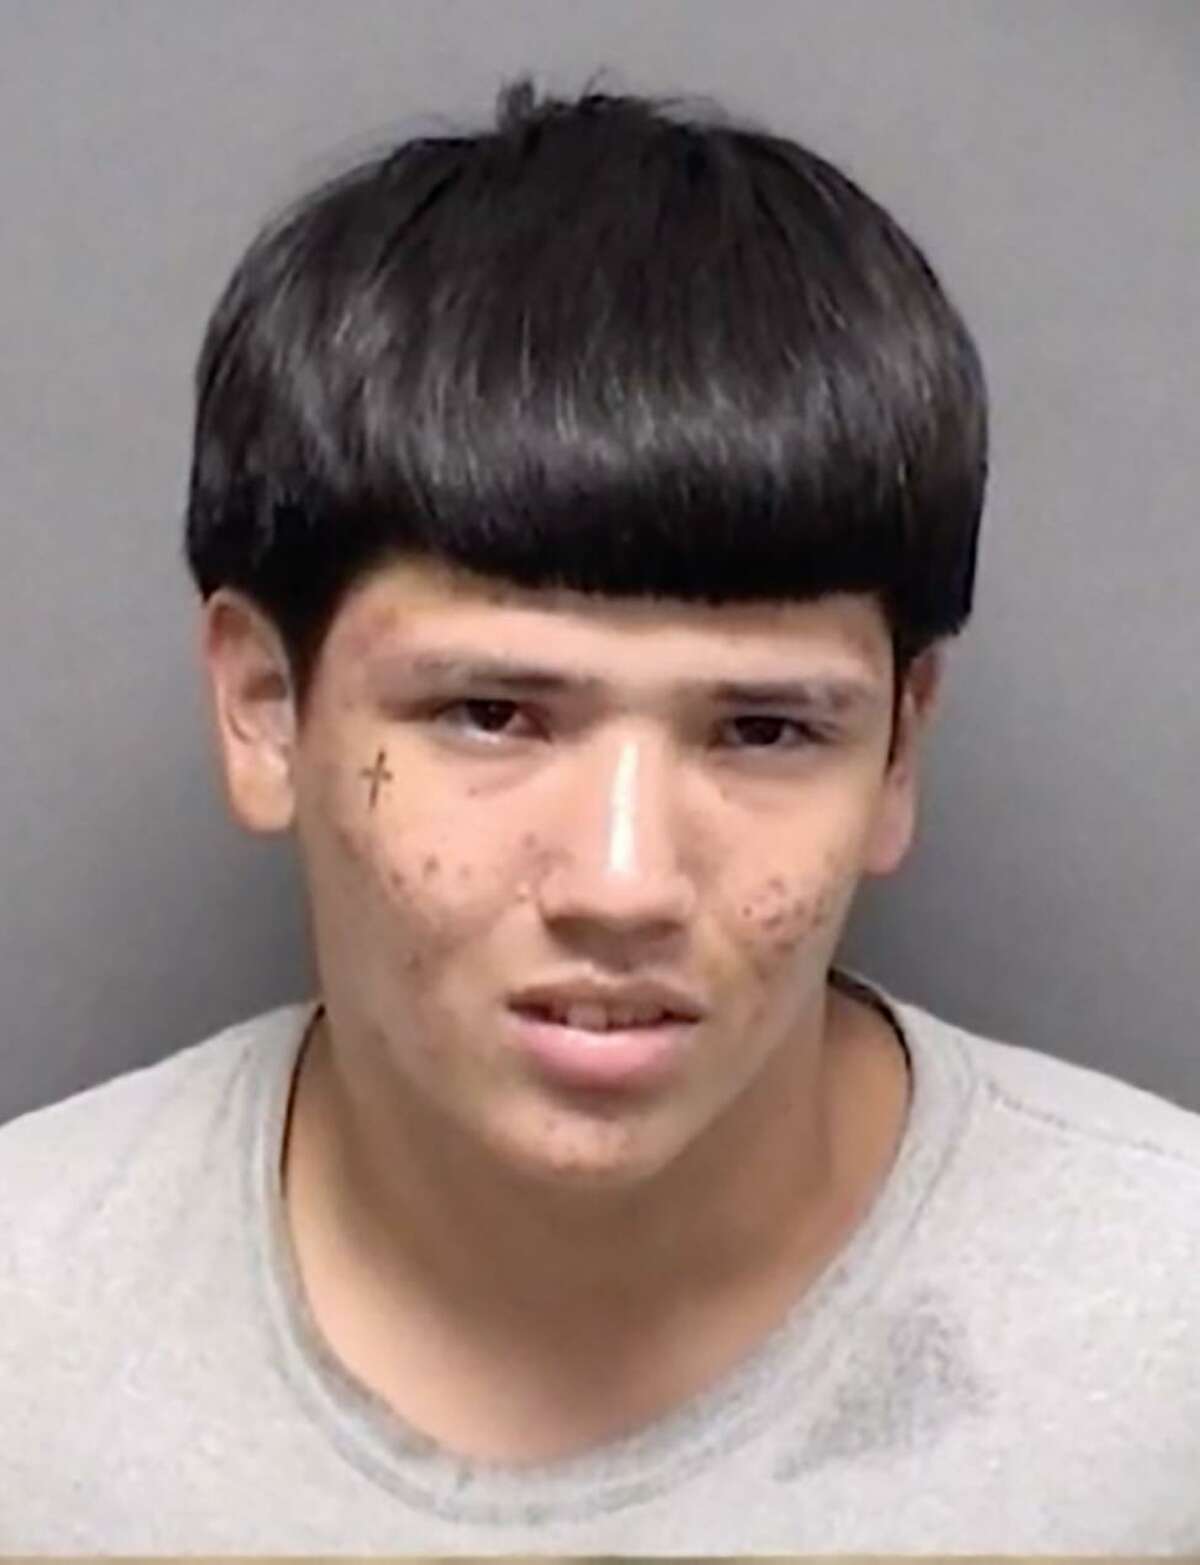 Adam Rangel, 18, was charged with intentionally concealing a human corpse.